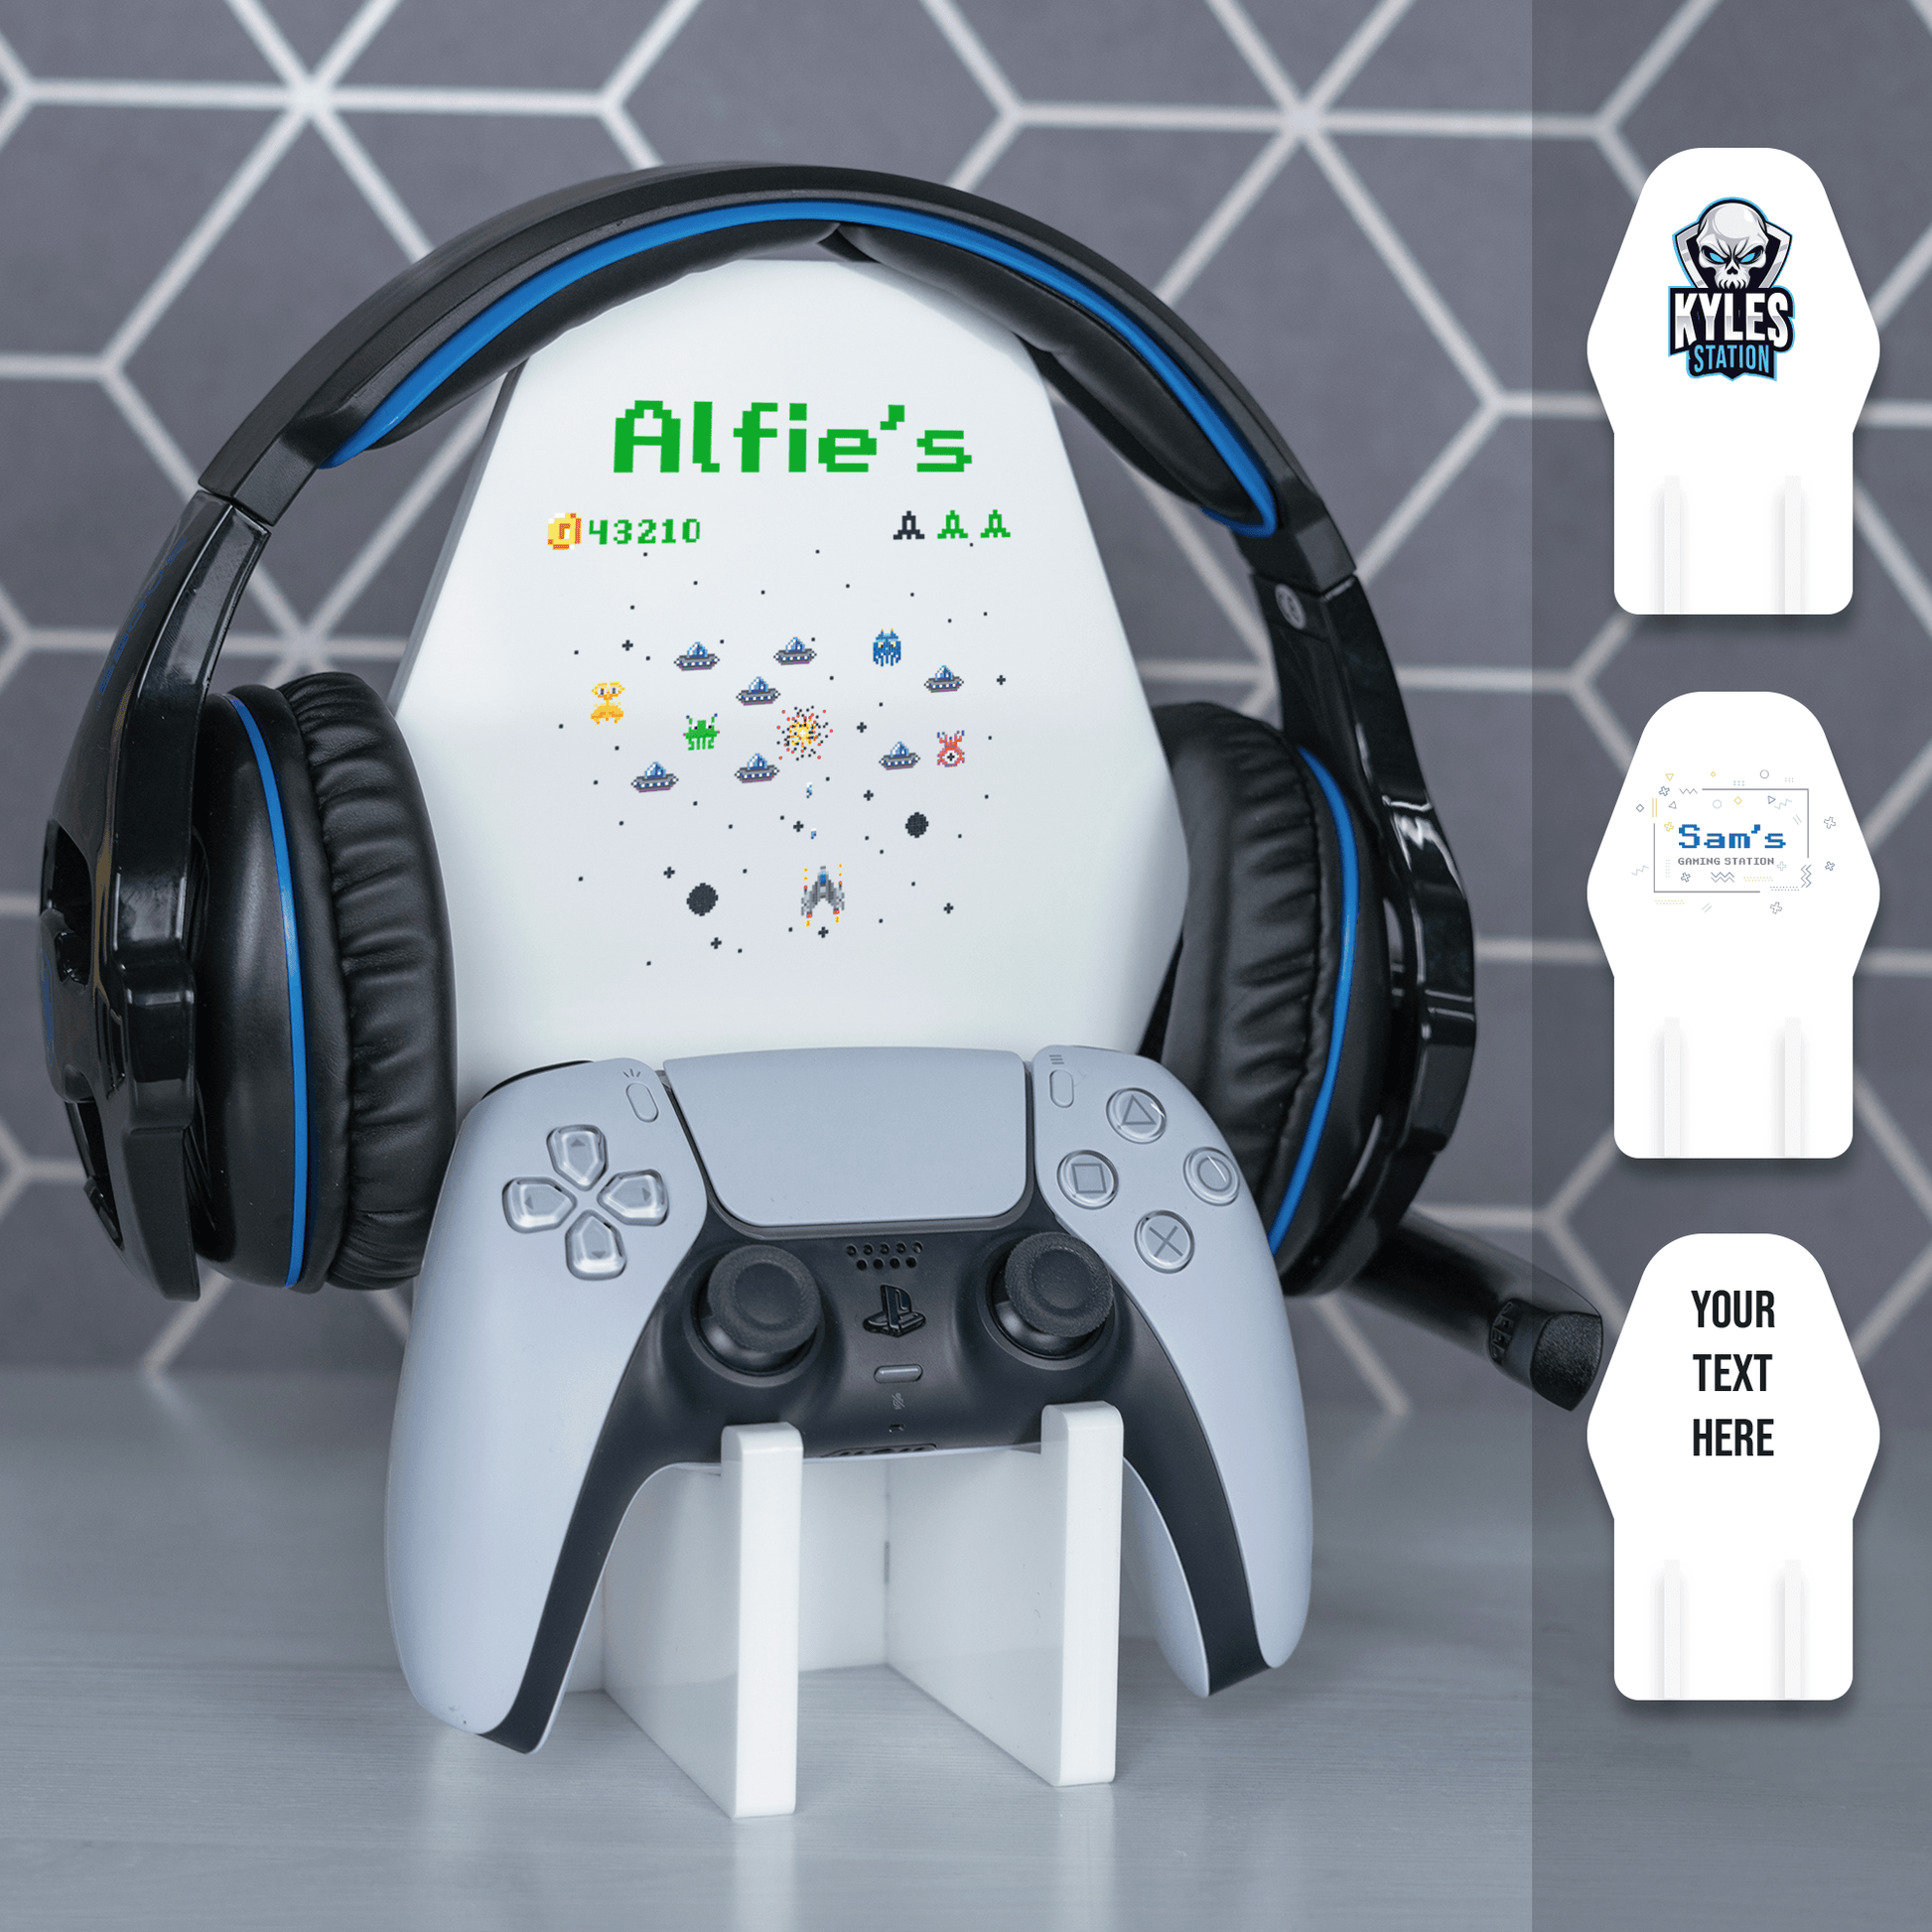 Personalised Gaming Station Controller and Headset stand - So Bespoke Gifts